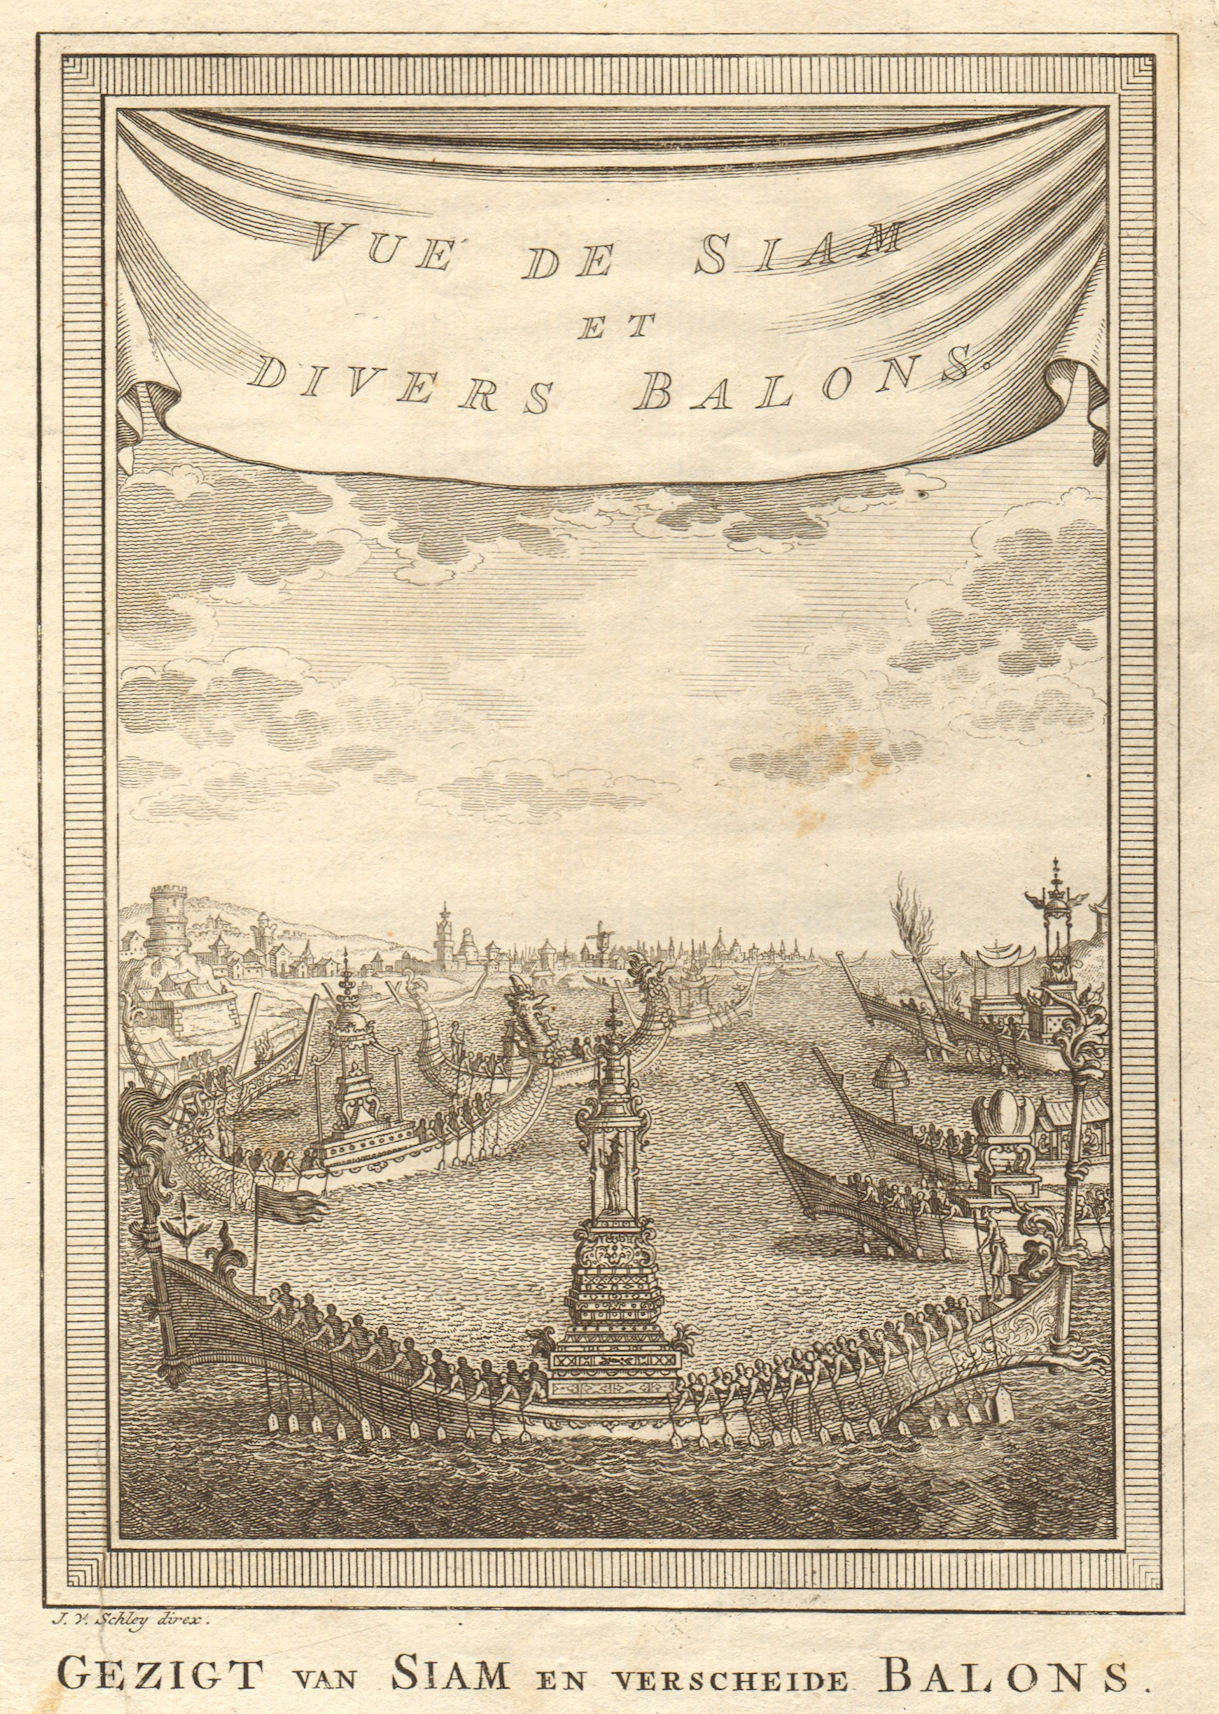 'Vue de Siam & divers balons'. View of Ayutthaya, Thailand. Barges. SCHLEY 1755